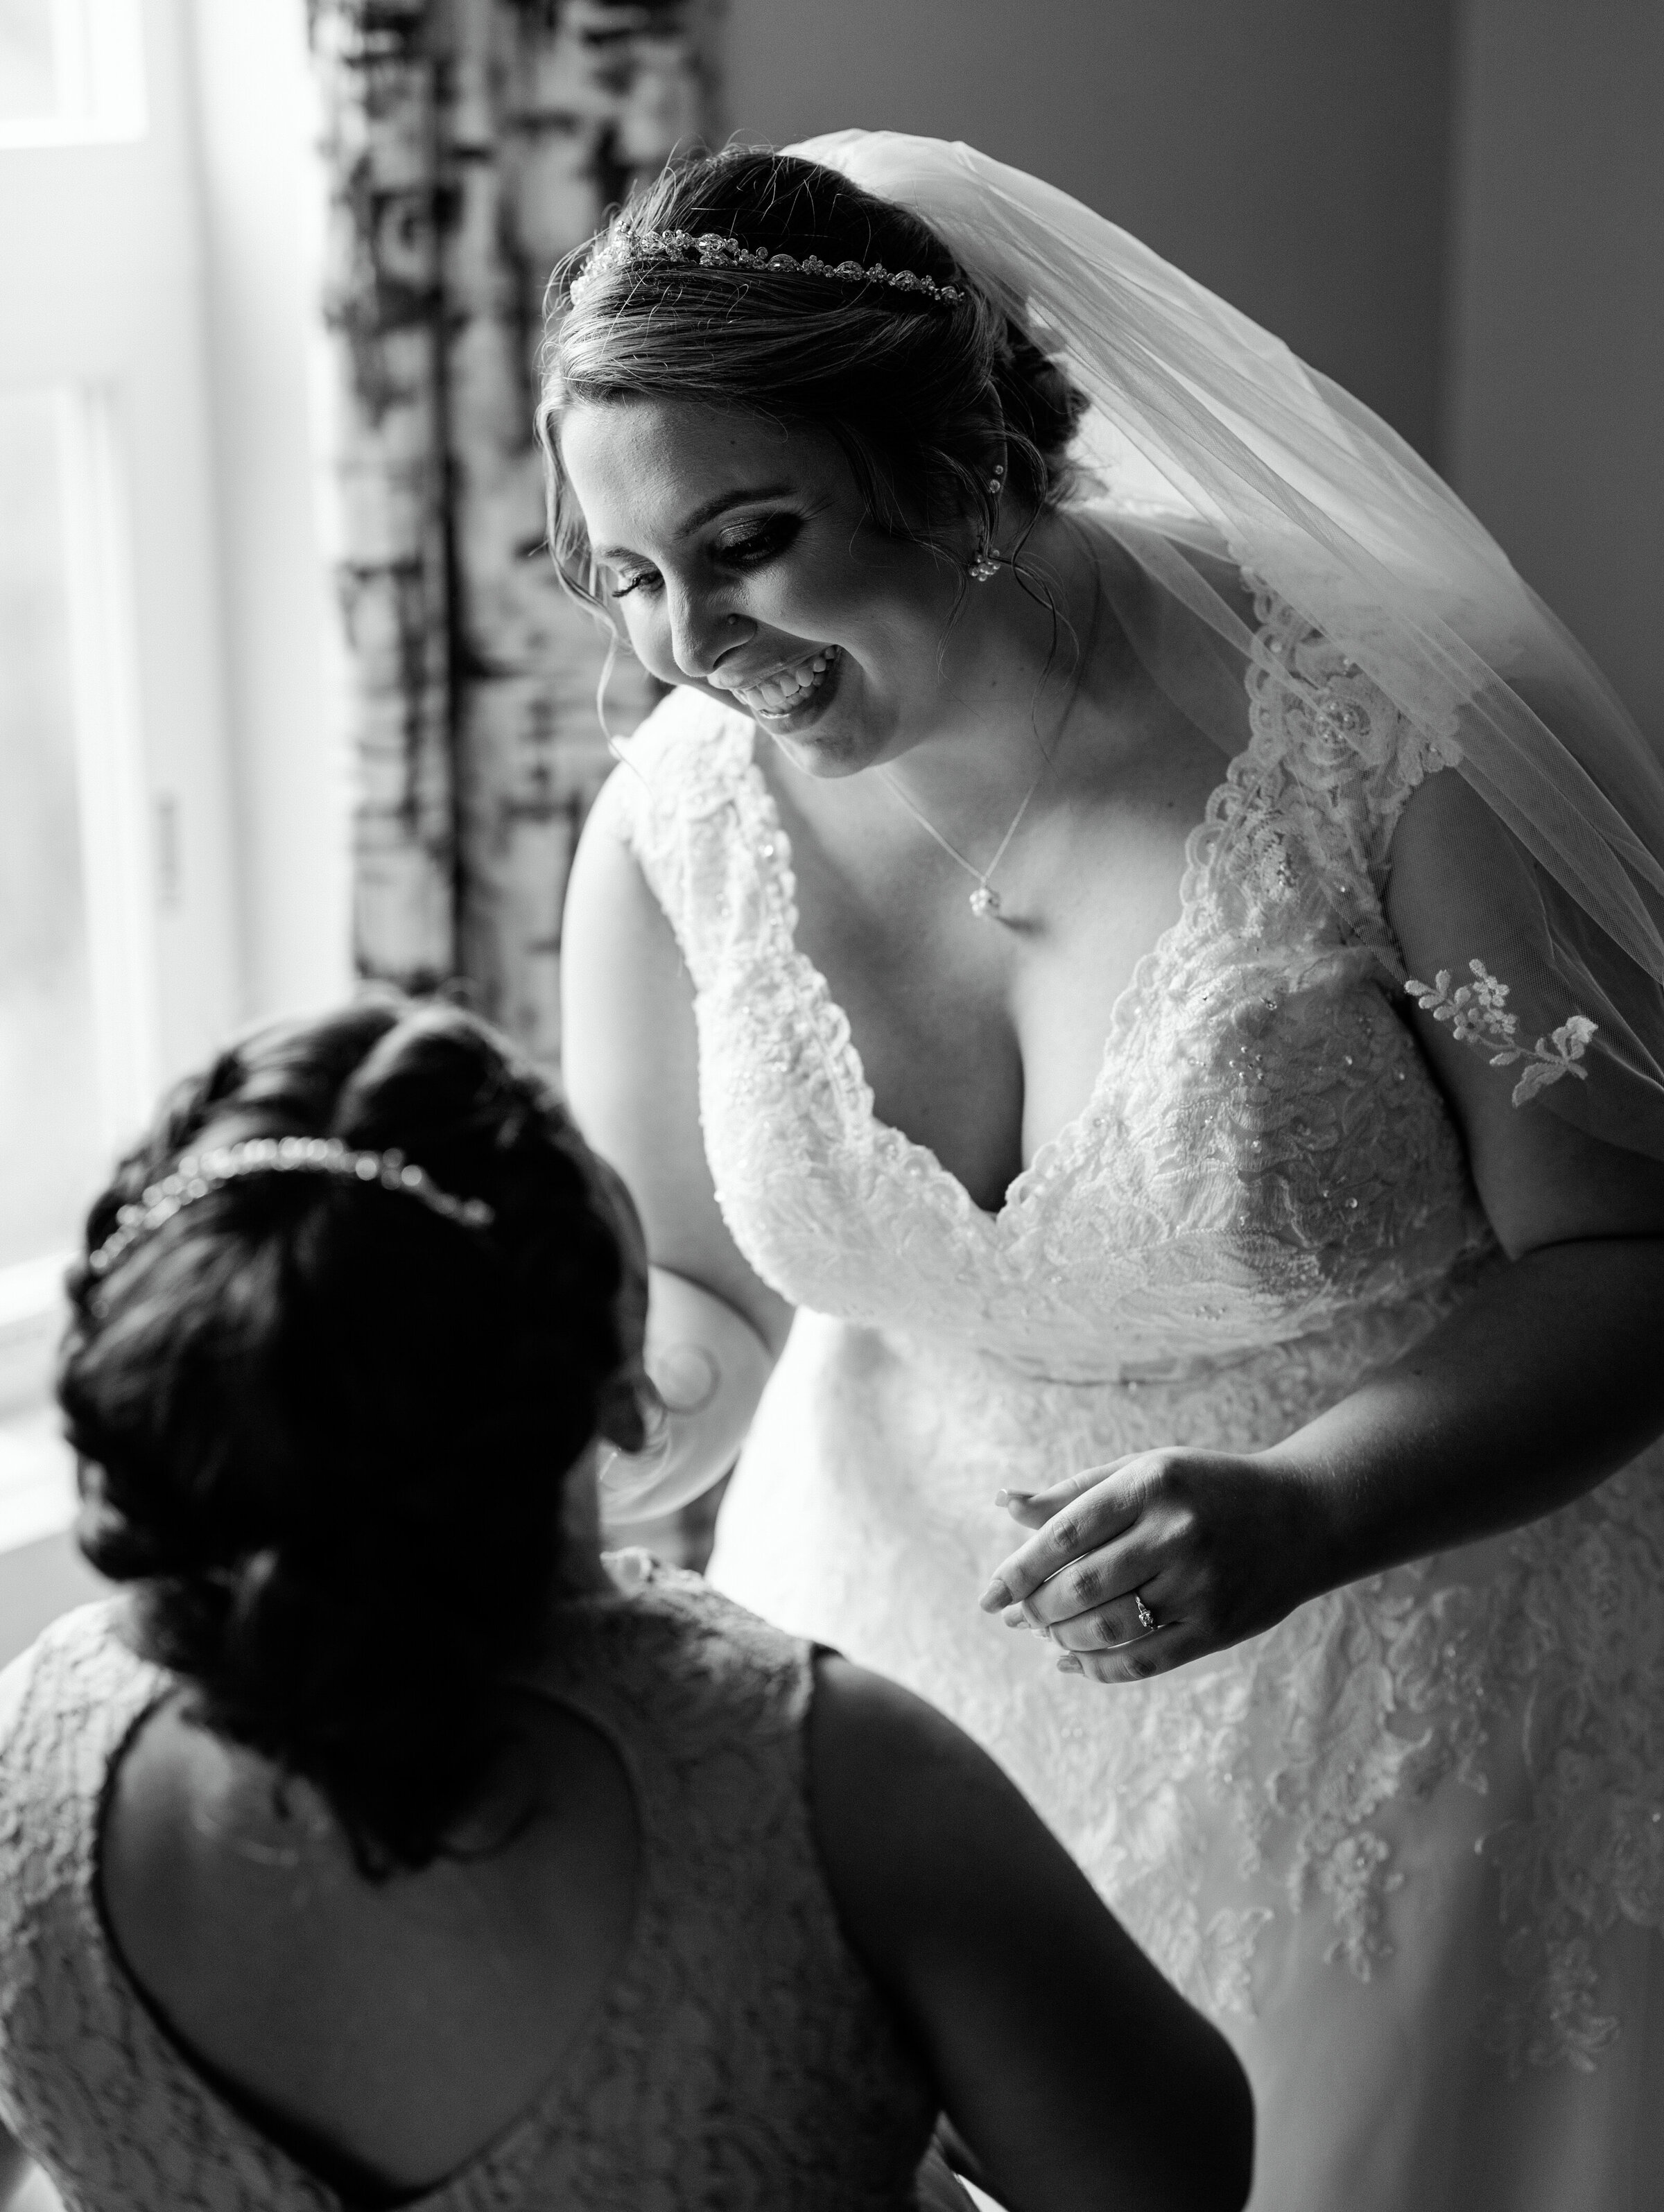 Bride sprays perfume on her daughter as they get ready for wedding ceremony in New Hampshire